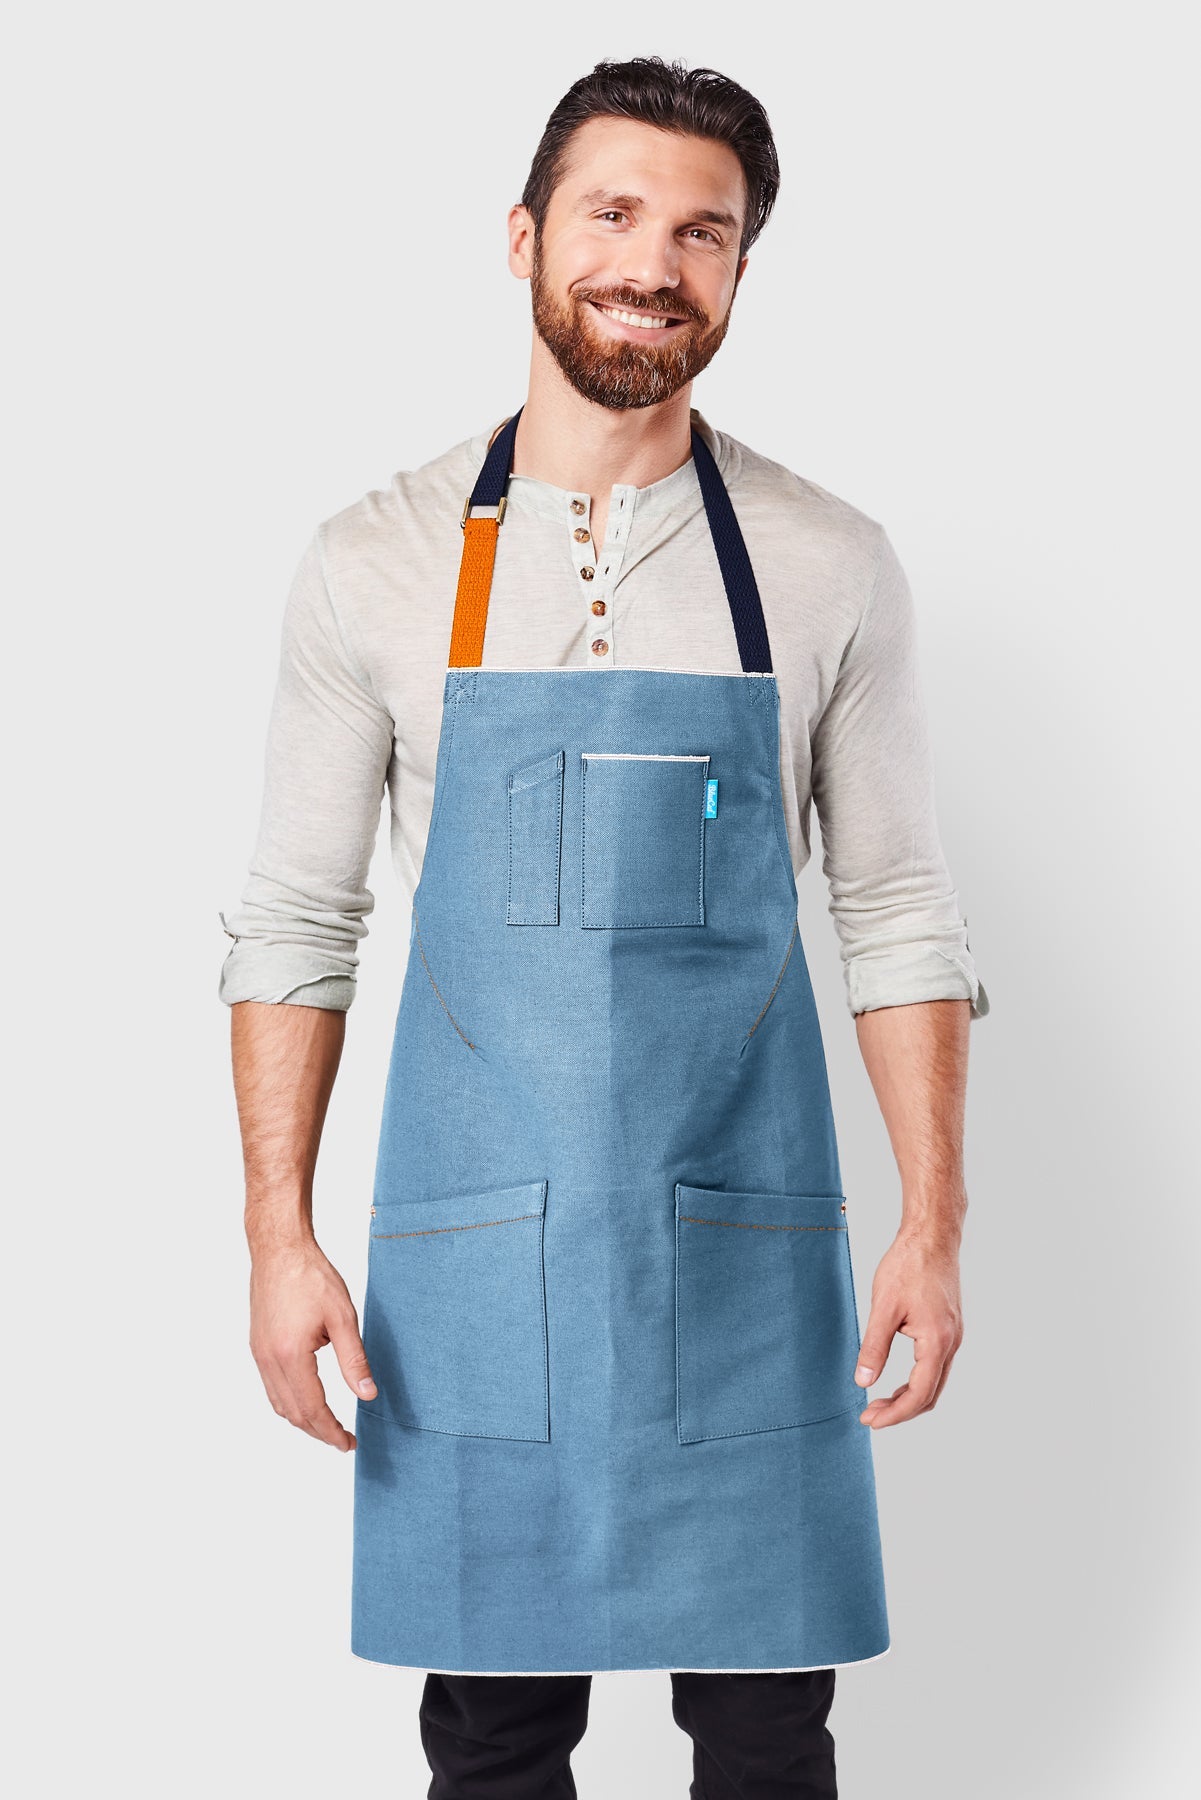 Image of person wearing Mason Apron in Sky Blue Selvage Denim. | BlueCut Aprons